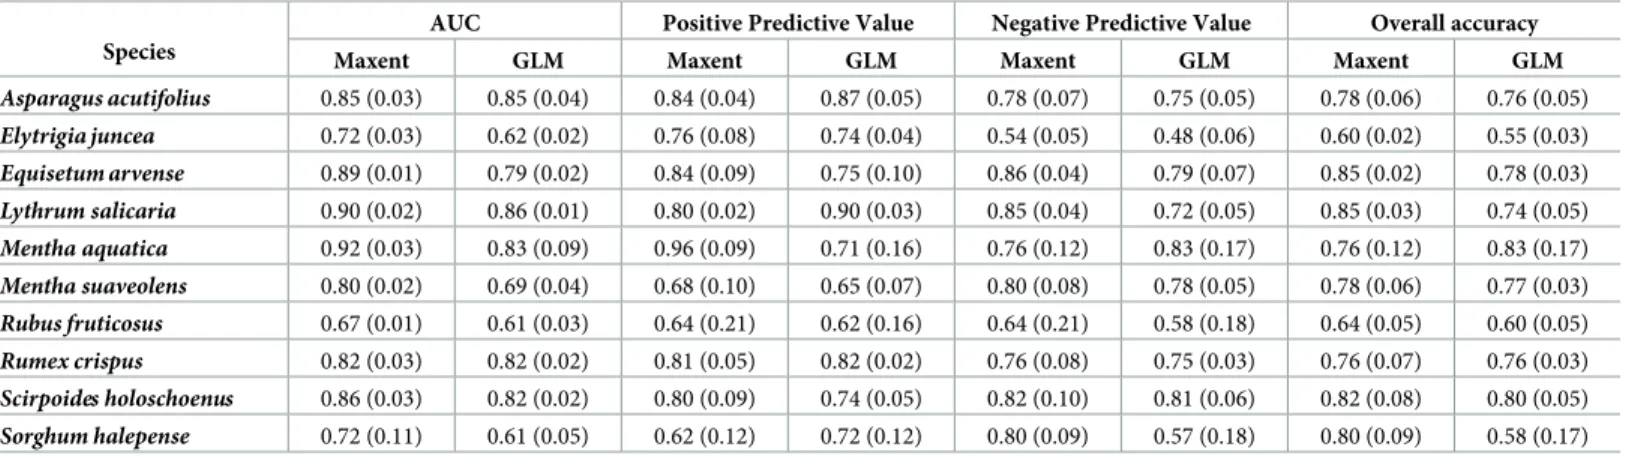 Table 3. Mean area under the curve (AUC) values and three metrics derived from confusion matrices with GLM and Maxent model for each species